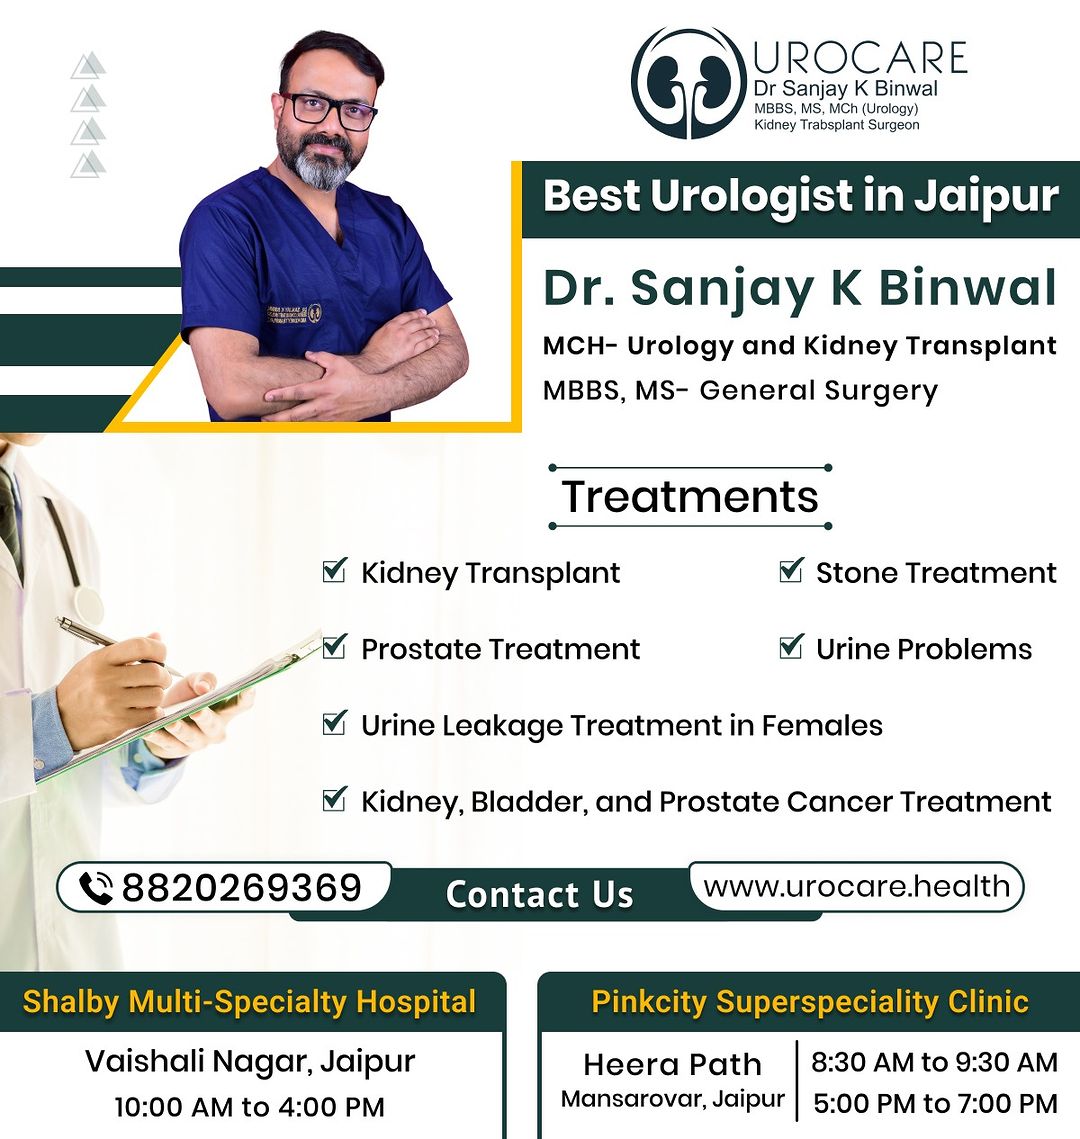 © 6)" ROCARE
Dr Saniy KBinwal

Best Urologist in Jaipur

 

Dr. Sanjay K Binwal

MCH- Urology and Kidney Transplant
MBBS, MS- General Surgery

 

 

 

Treatments
\ ¥ Kidney Transplant ¥ Stone Treatment
~, .
EO po ¥ Prostate Treatment ¥ Urine Problems
i Se
i ¥ Urine Leakage Treatment in Females

v Kidney, Bladder, and Prostate Cancer Treatment

8820269369 JITTAT

Shalby Multi-Specialty Hospital Pinkcity Superspeciality Clinic

  

Vaishali Nagar, Jaipur Heera Path
10:00 AM to 4:00 PM Mansarovar; Jalpar

8:30 AM to 9:30 AM
5:00 PM to 7:00 PM